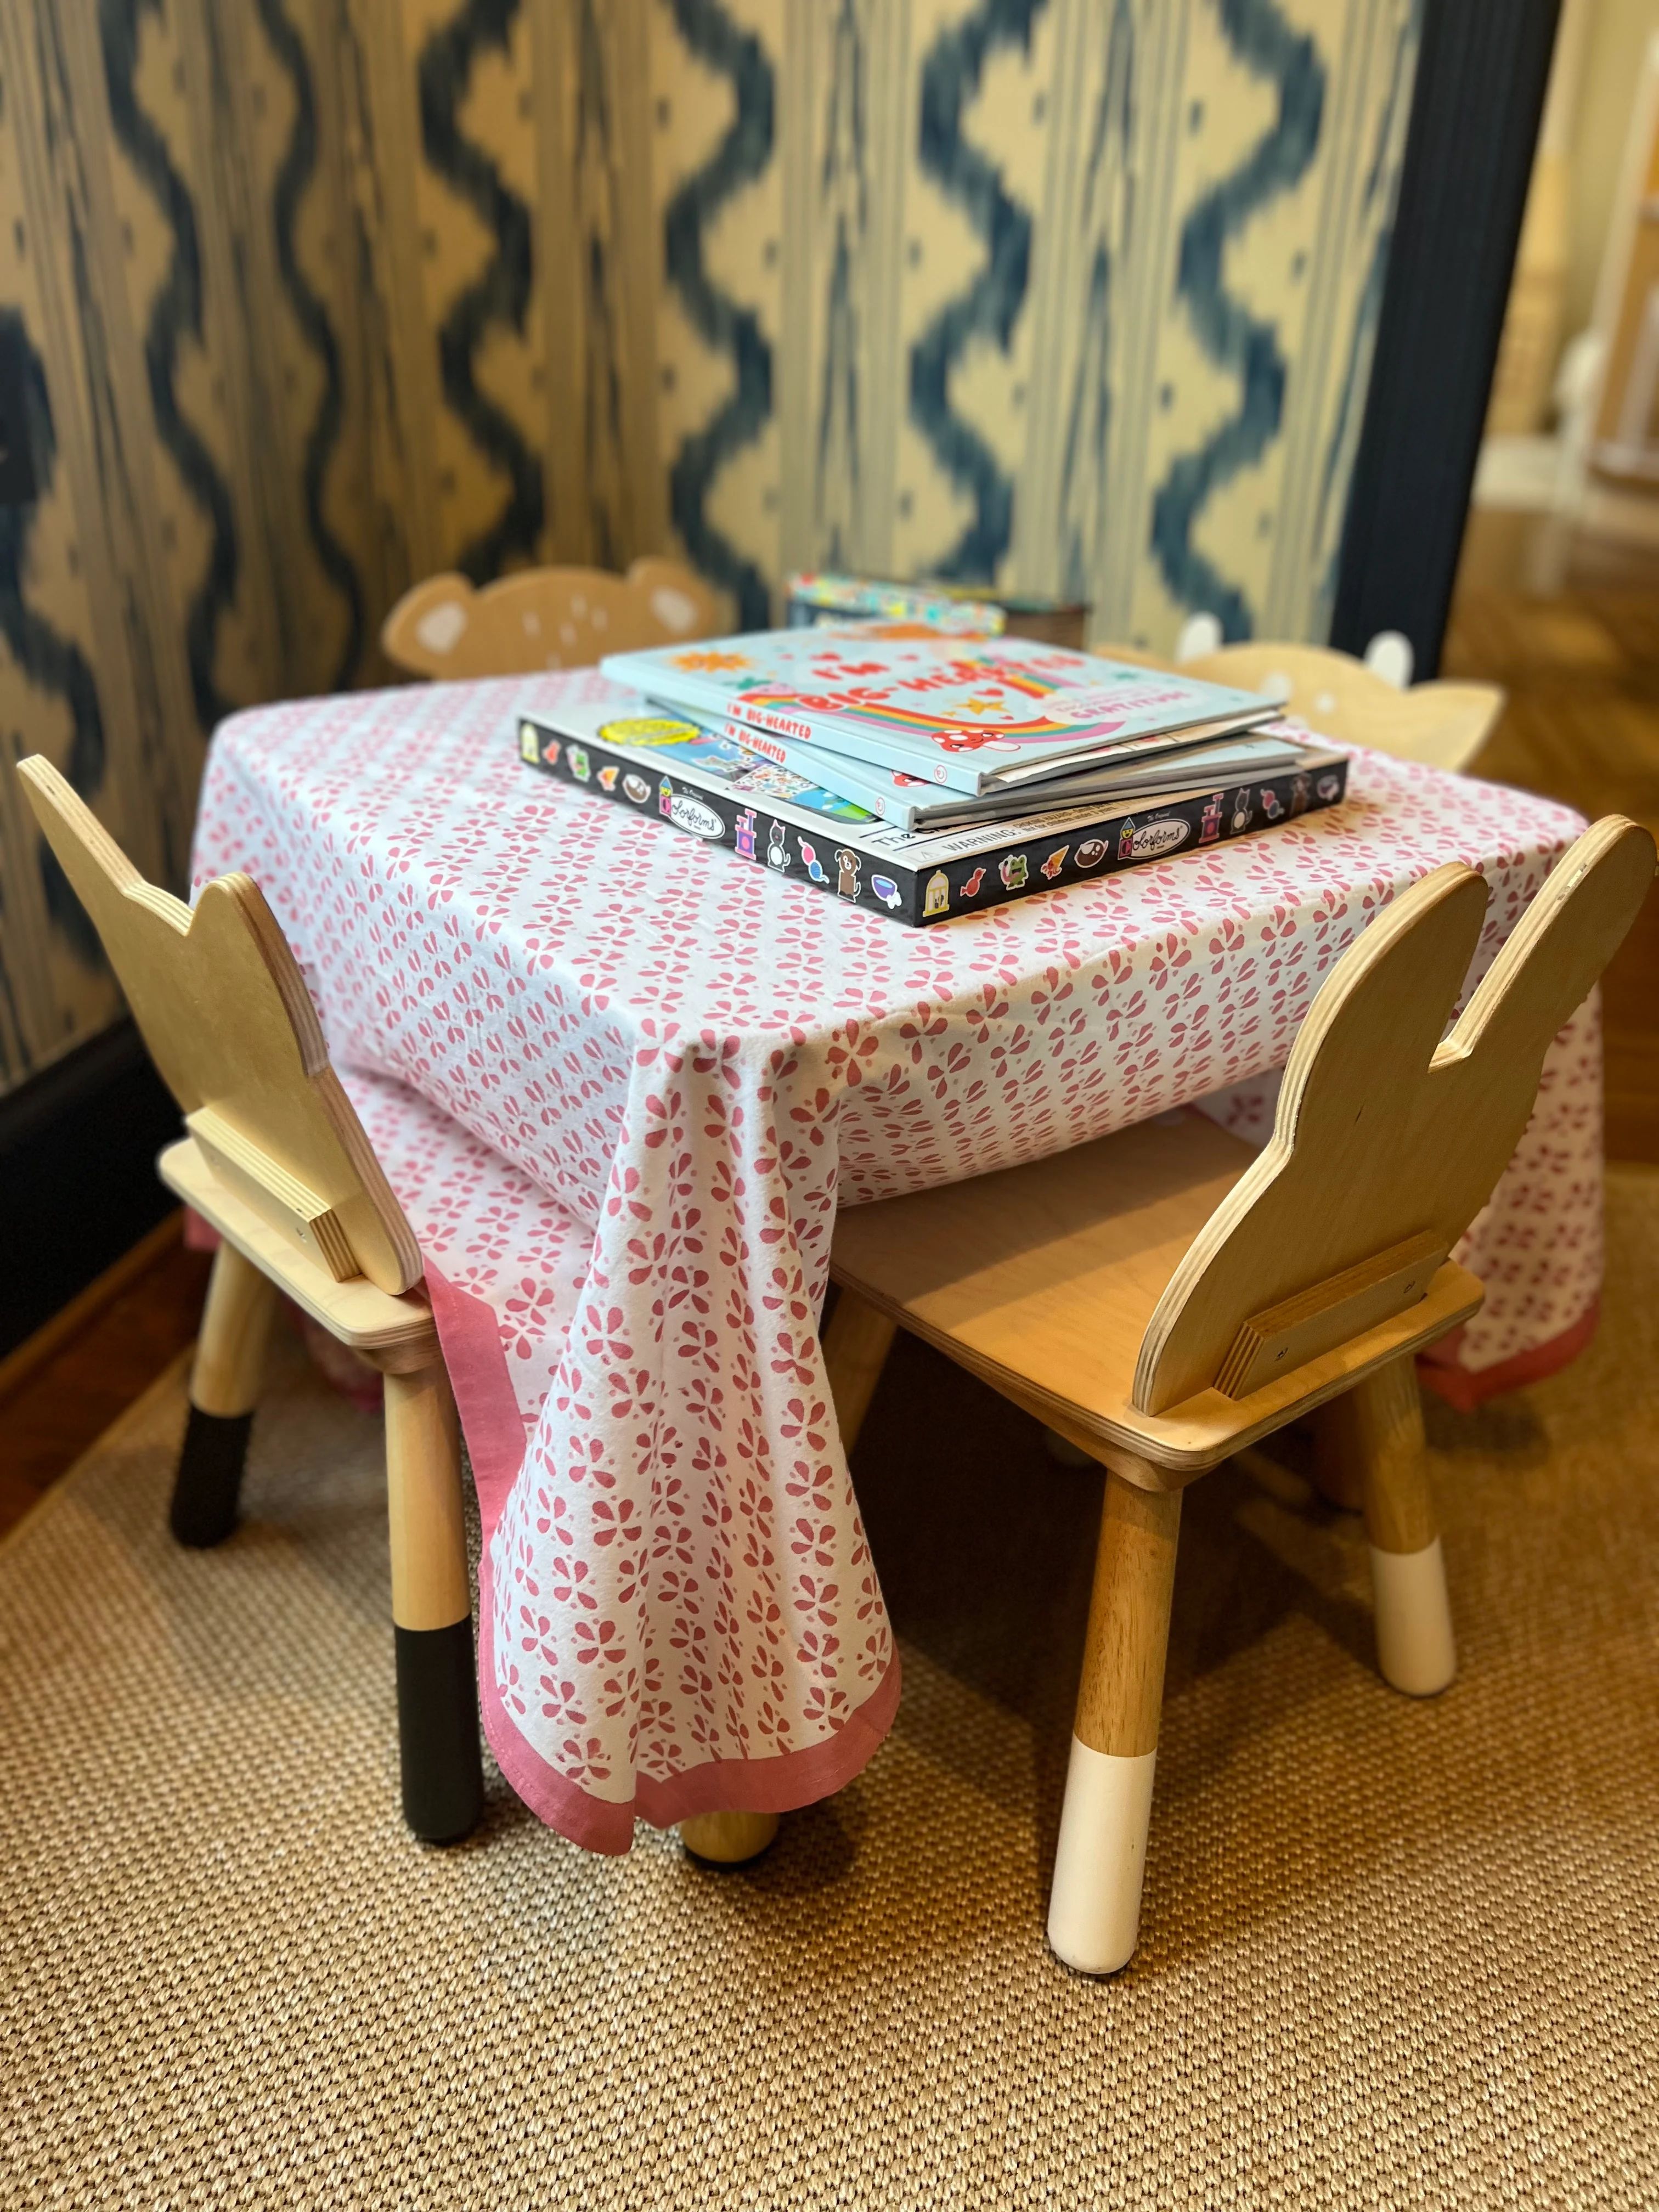 Petals Children's Tablecloth in Dusty Rose - 44" x 44" | Christina Dickson Home